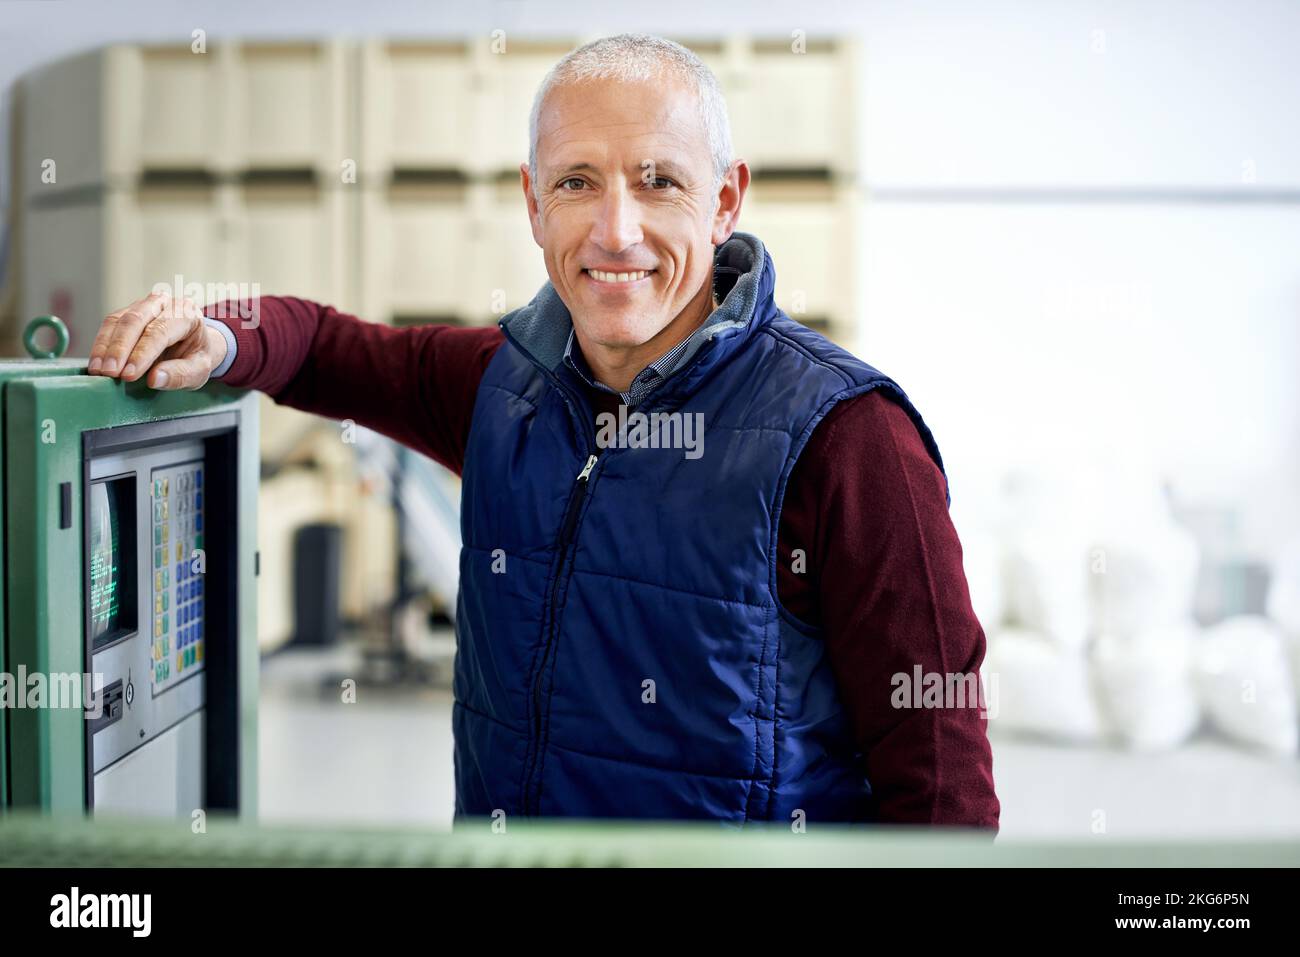 These machines run around the clock. Portrait of a mature man standing next to machinery in a factory. Stock Photo